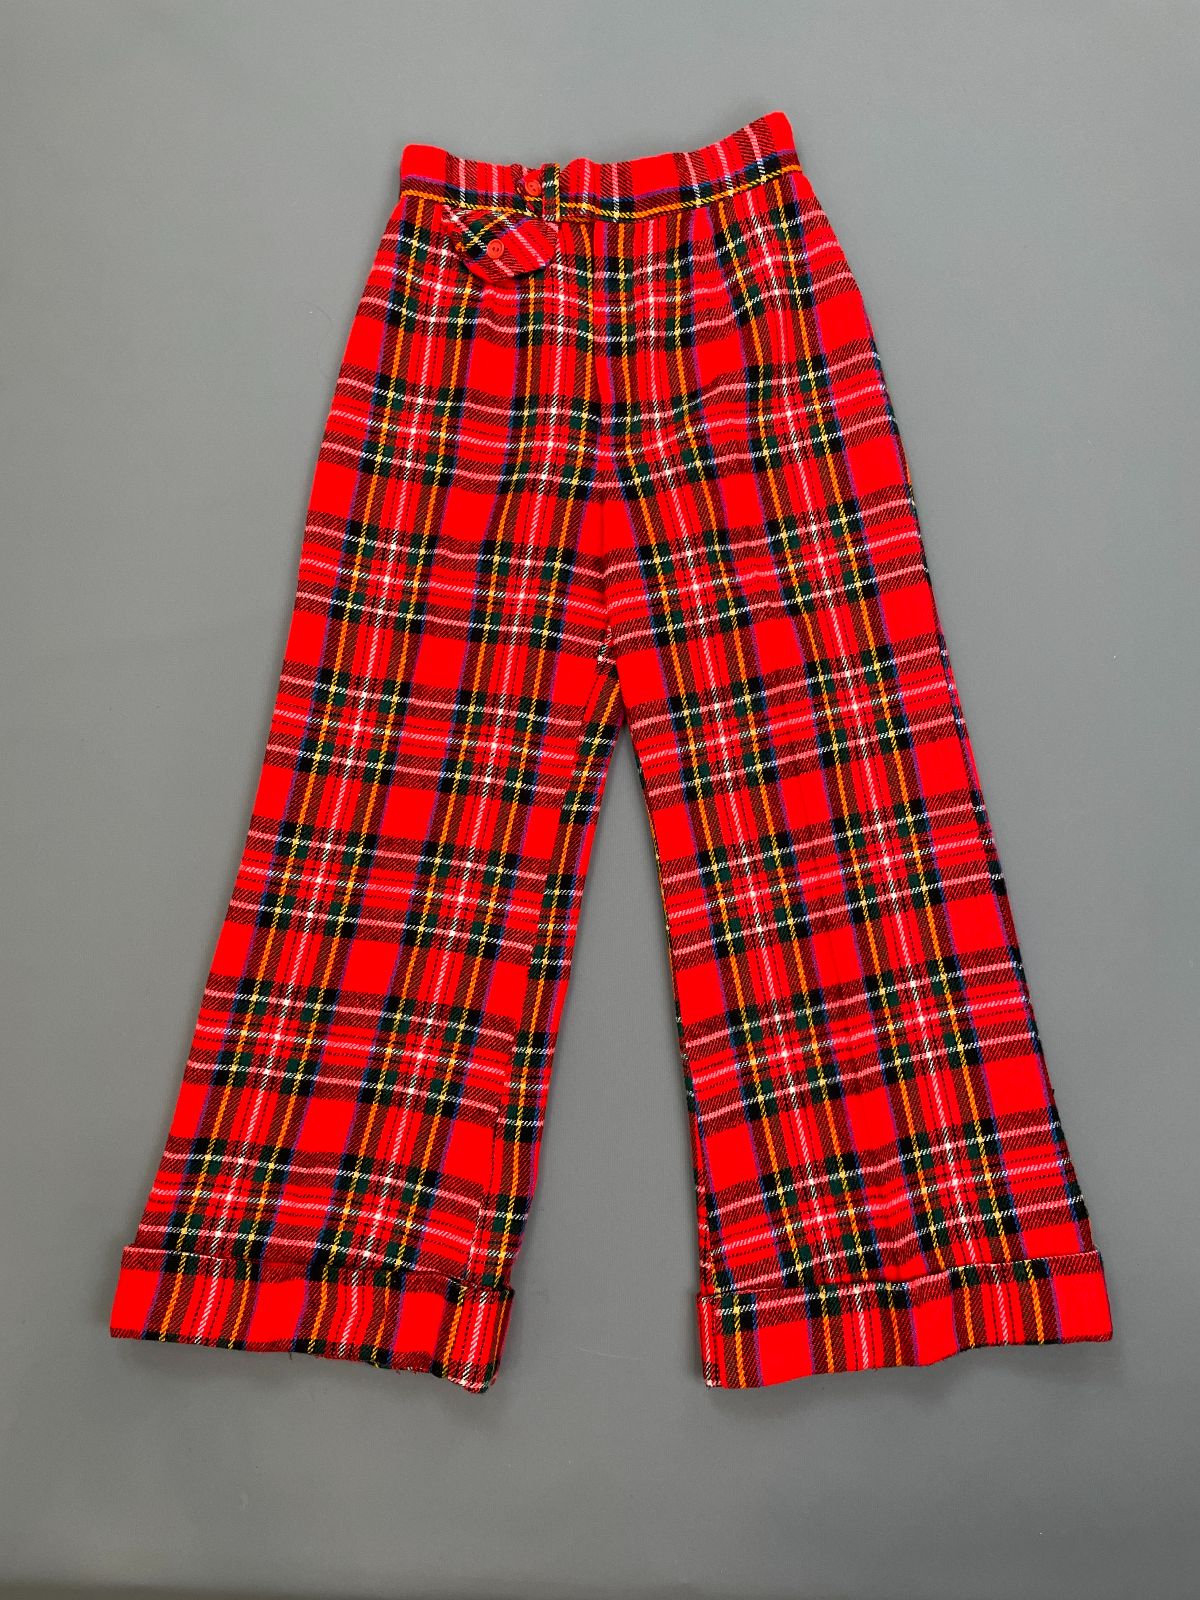 product details: BRIGHT! 1970S HIGH WAISTED CUFFED WIDE LEG PLAID FLANNEL STYLE PANTS SMALL FRONT COIN POCKET photo